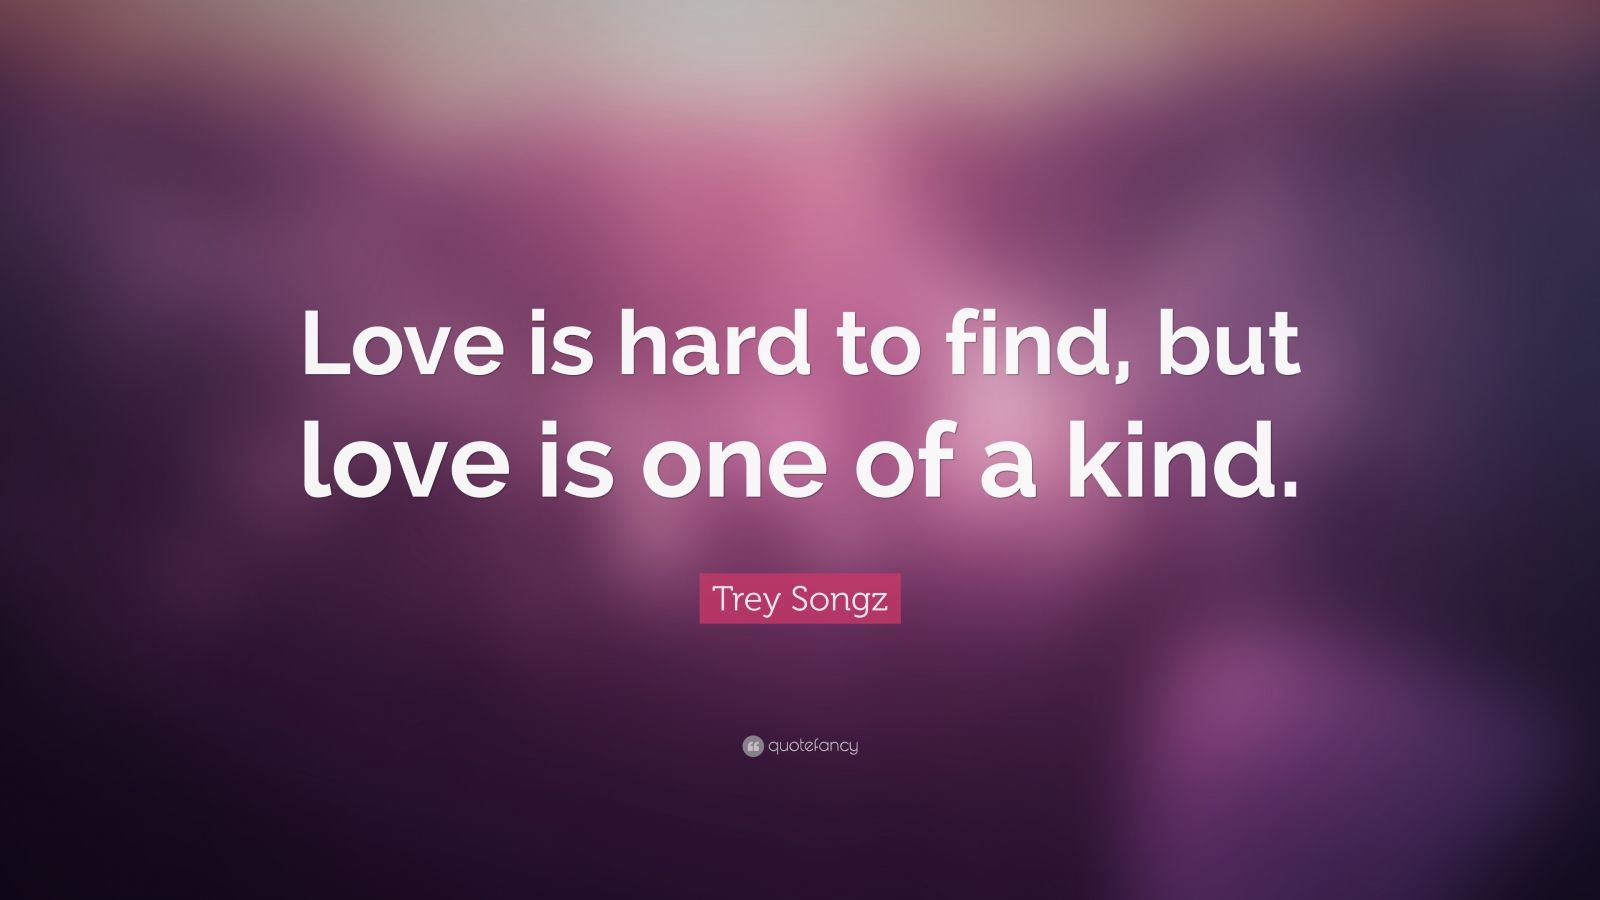 Trey Songz Quote: “Love is hard to find, but love is one of a kind.” (7 ...